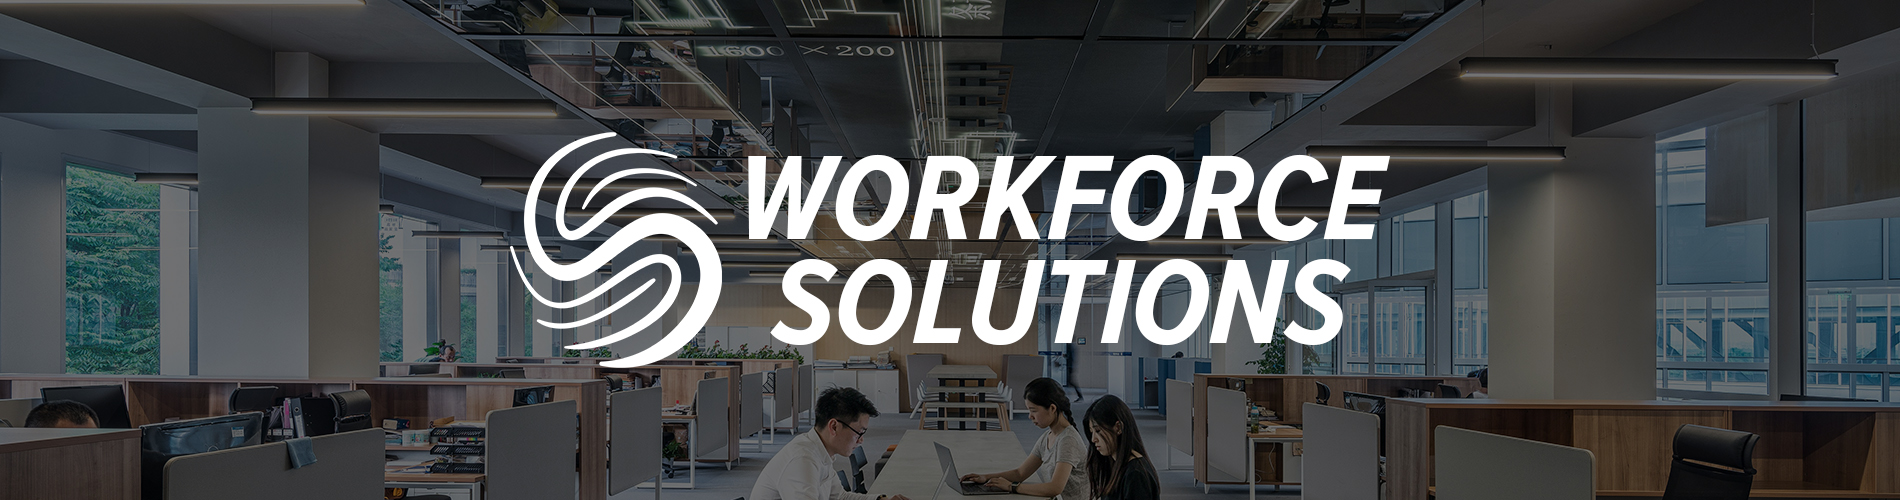 Workforce Solutions, Specialized Recruiting in Phoenix, AZ